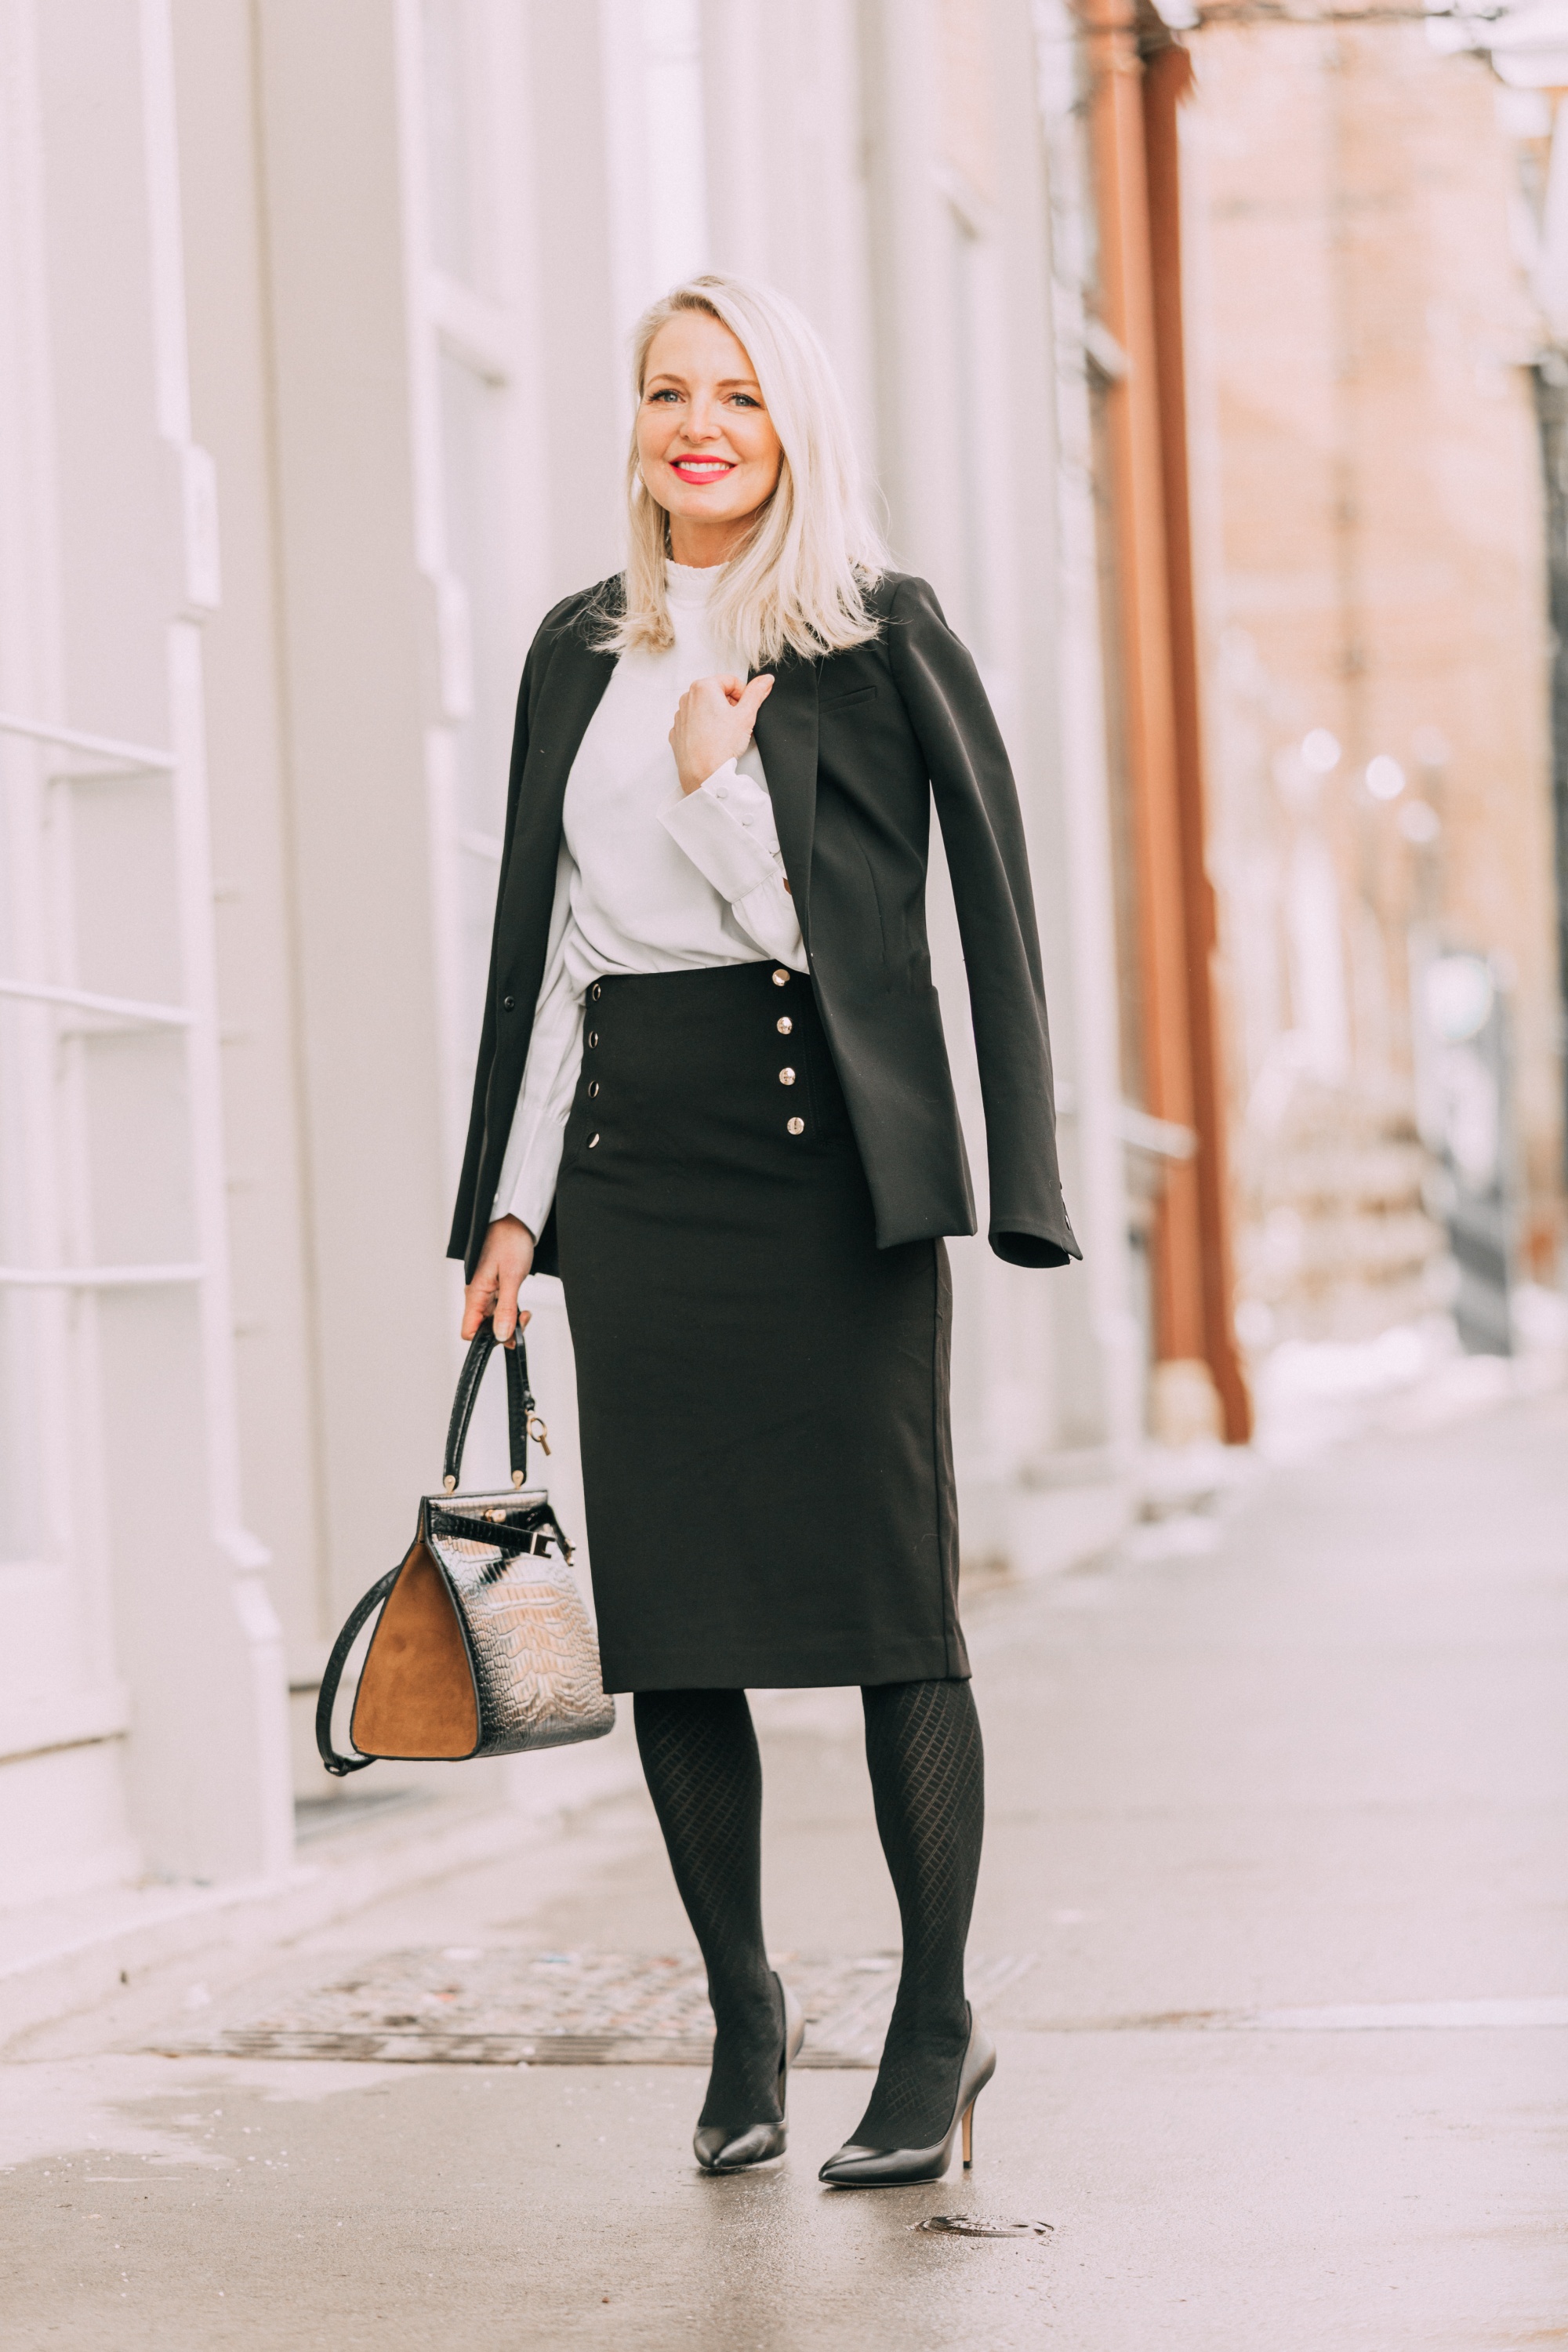 Wardrobe Basics, Fashion Blogger Erin Busbee Of Busbeestyle.com Sharing Wardrobe Basics From Ann Taylor Wearing A Black Pencil Skirt With Sailir Buttons, A White Ruffle Neck Blouse, Classic Black Blazer, Black Tights, And Black Pumps All From Ann Taylor In Telluride, Colorado